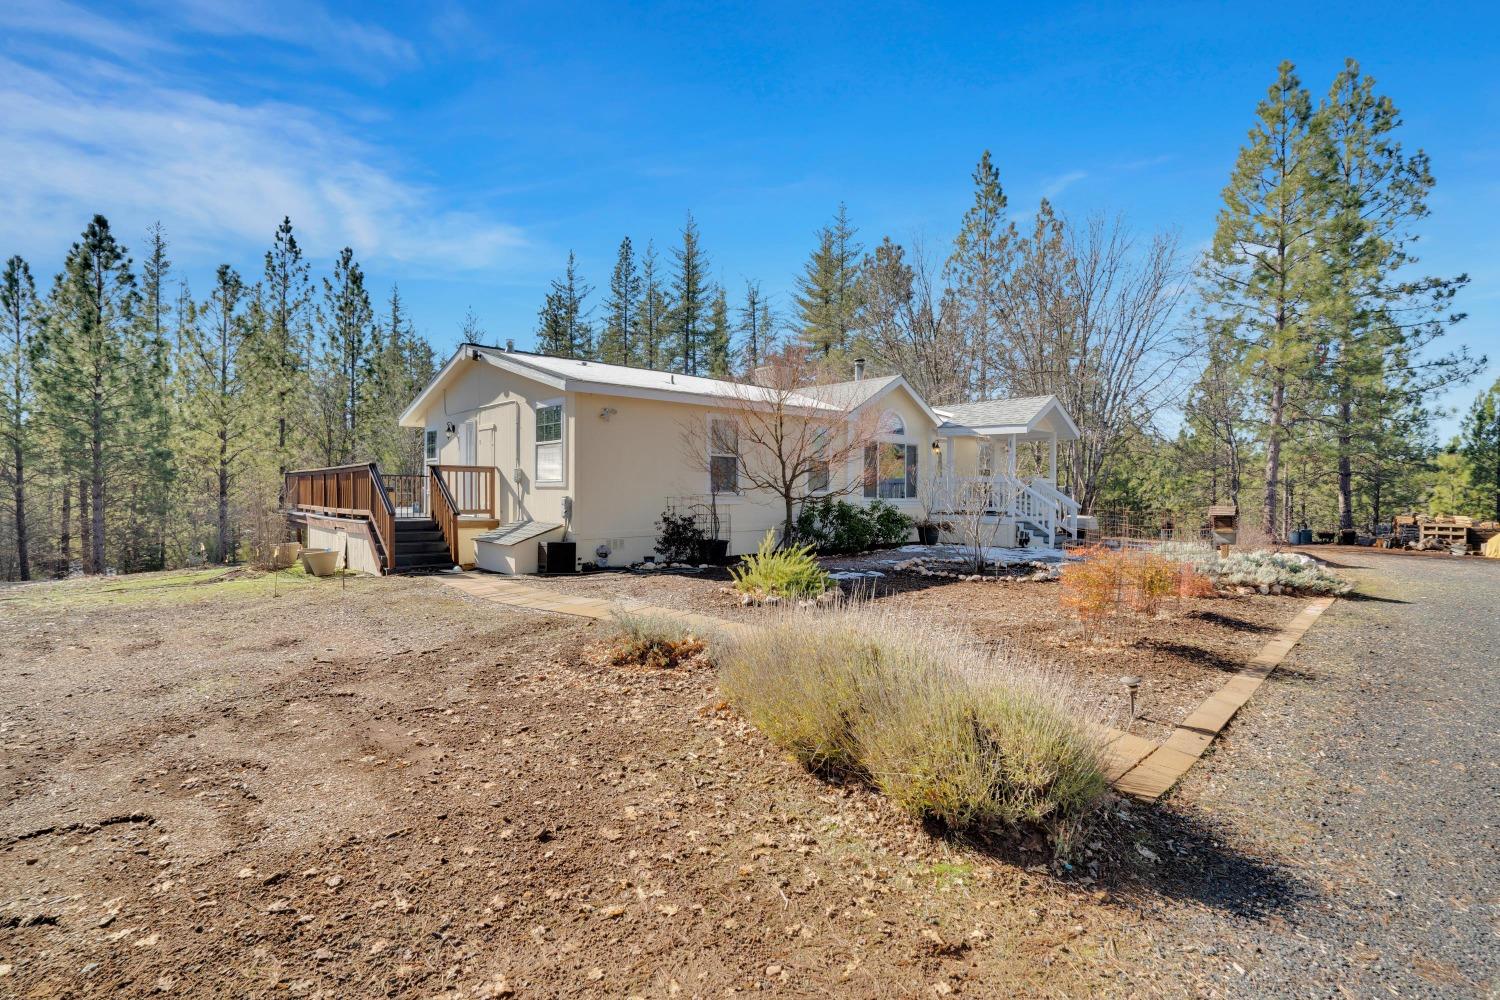 PENDING – 6916 Dogtown Road #B, Coulterville, CA 3bd/2bth/1350sf/5.29ac